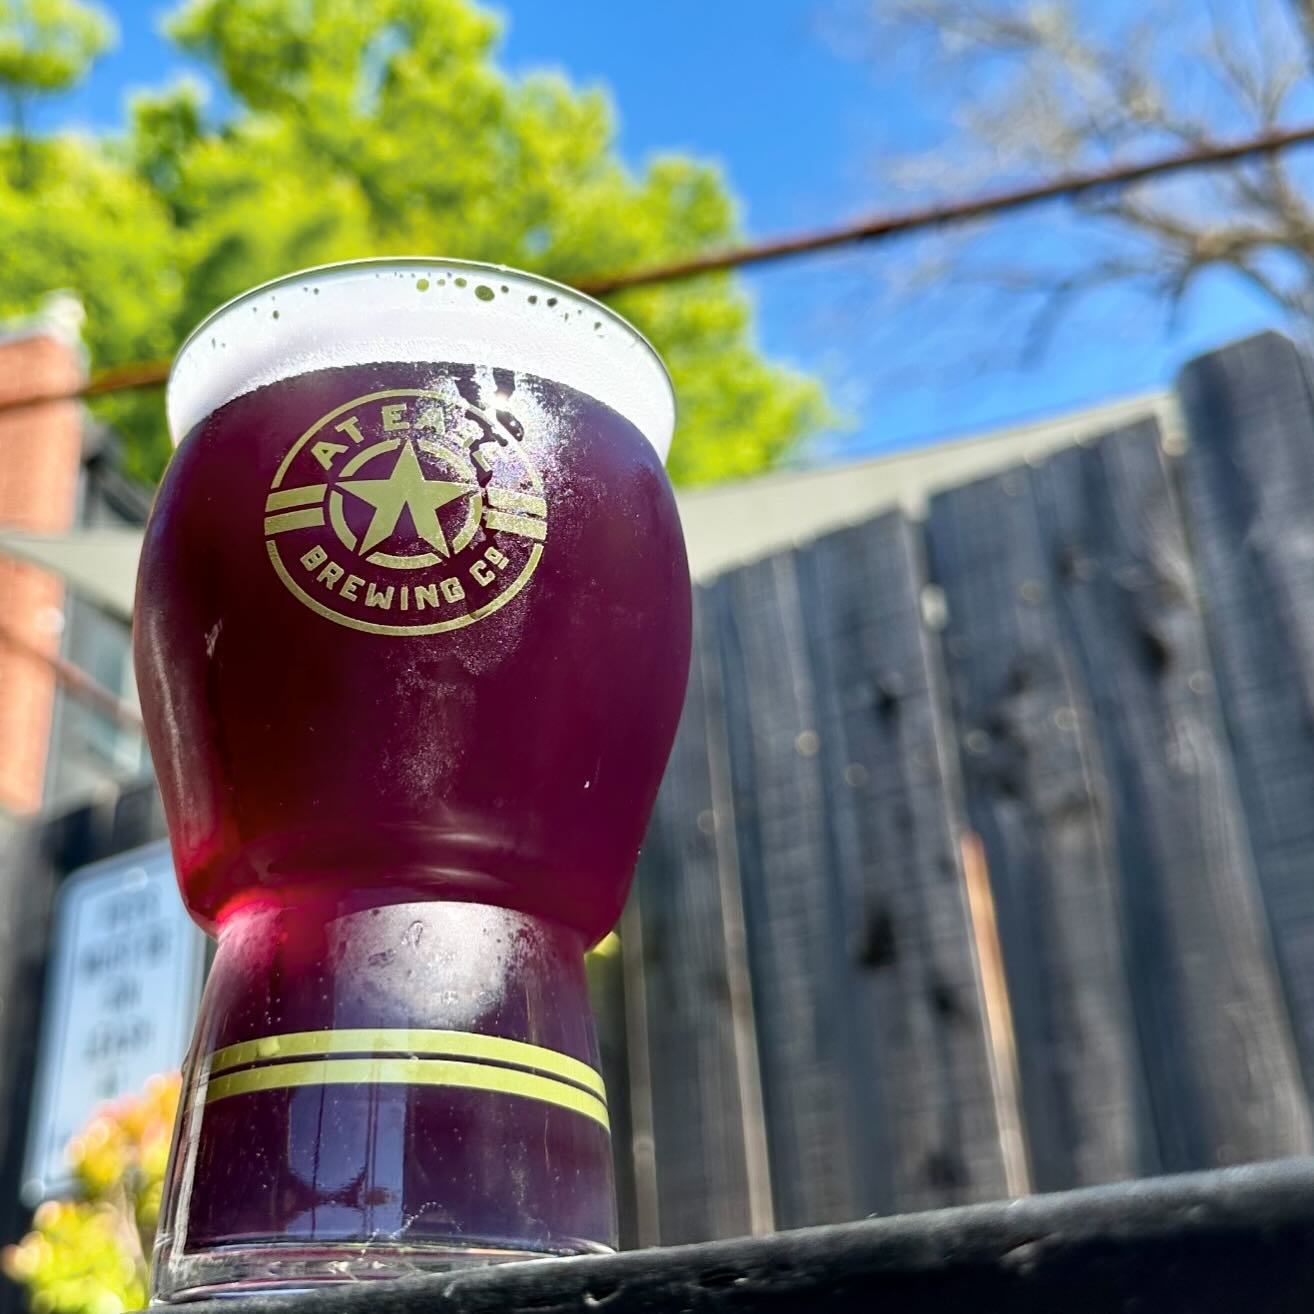 Purple beer is here! 

LTB, our purple blonde ale brewed with butterfly pea flower is on tap! The most delicious shade of purple makes it the perfect way to cheer our @sacramentokings thru the final games of the season. 🟣🔦
___
#aebc #ateasebrewingc